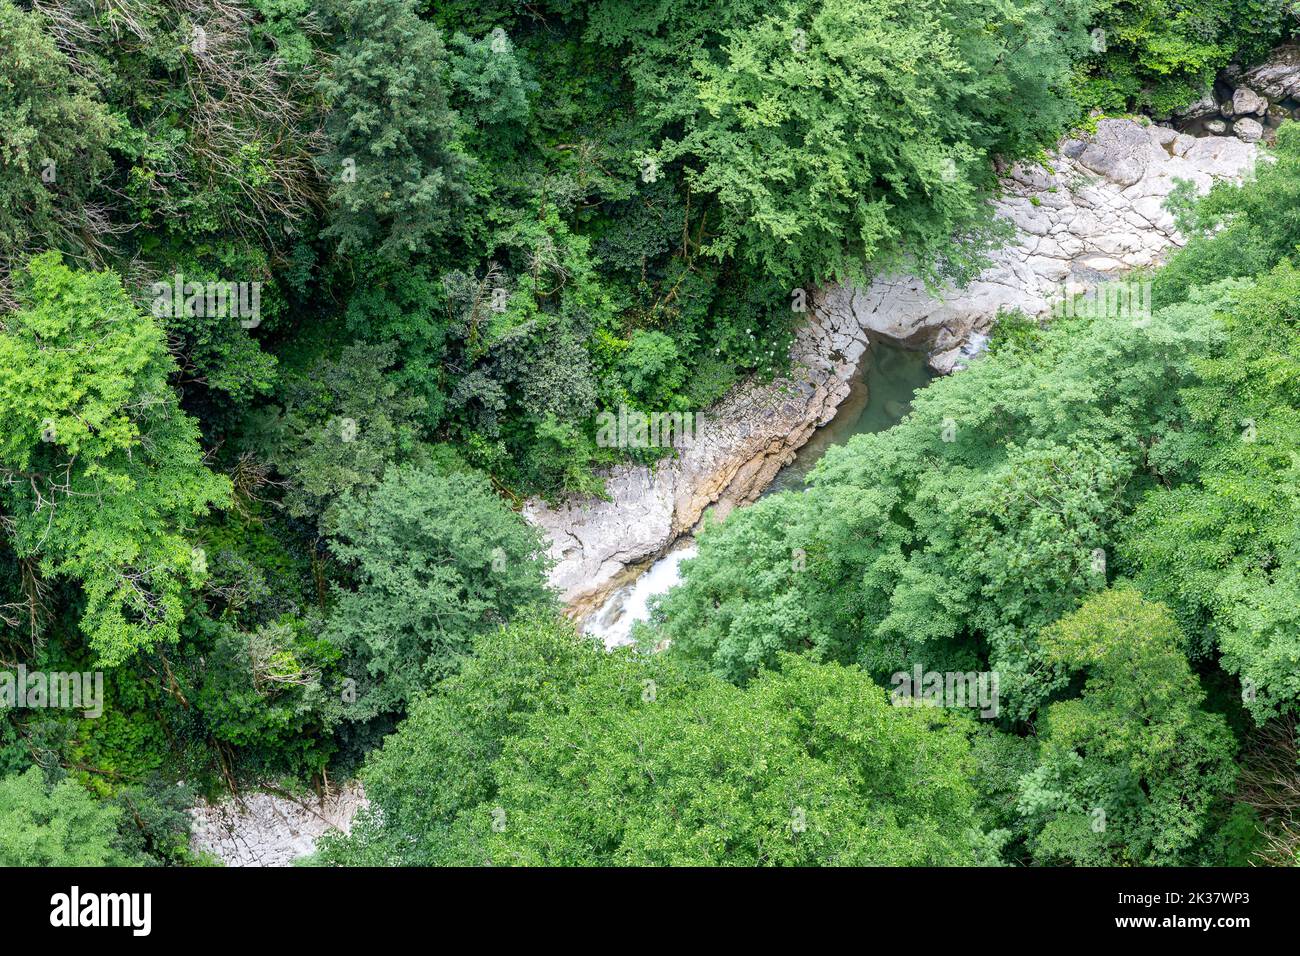 Okatse Canyon with Okatse river in Georgia, Imereti, lush vibrant green vegetation and forests with river seen from above. Stock Photo